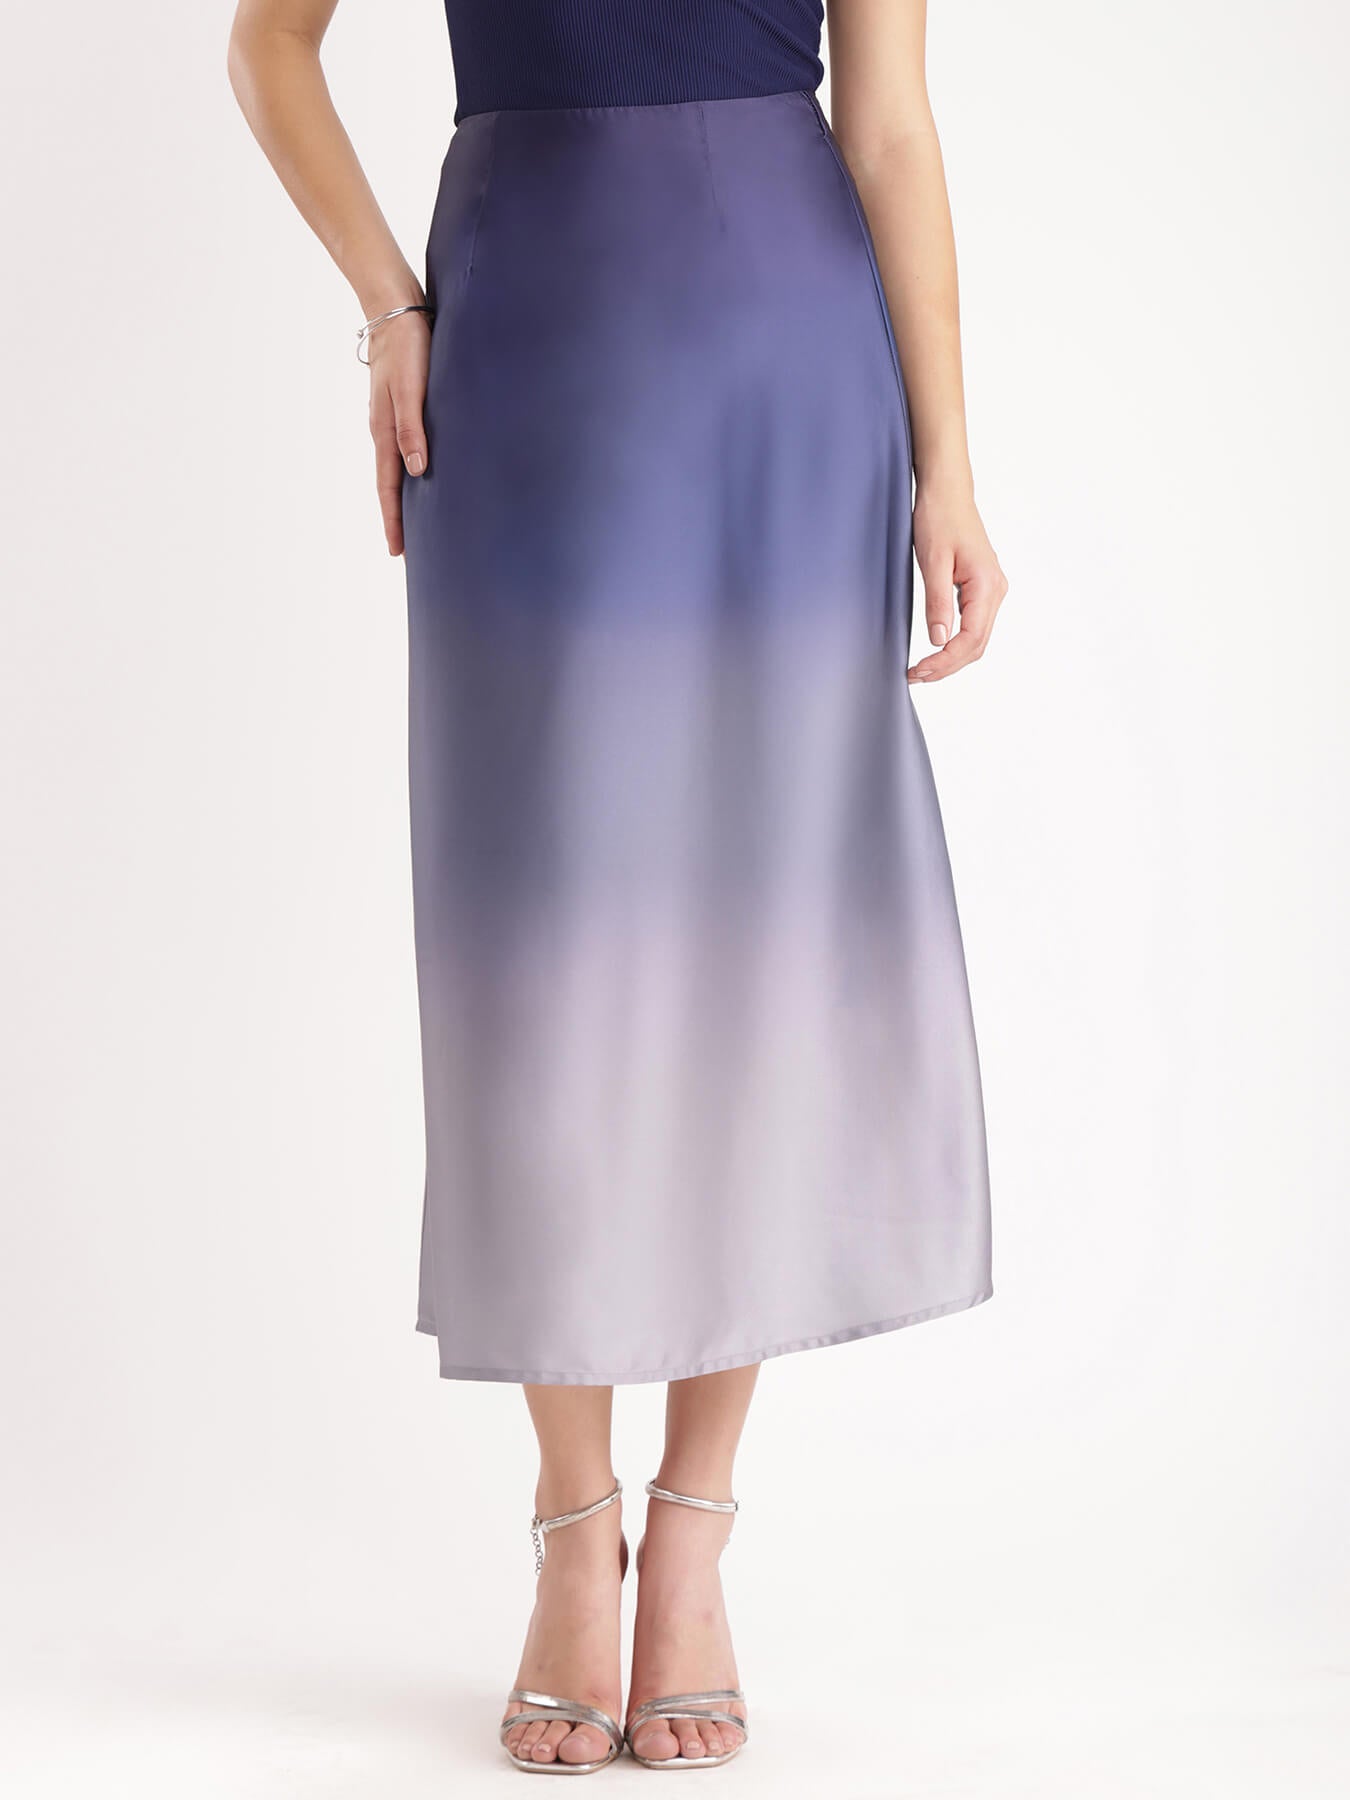 Ombre Midi Skirt - Blue And Grey